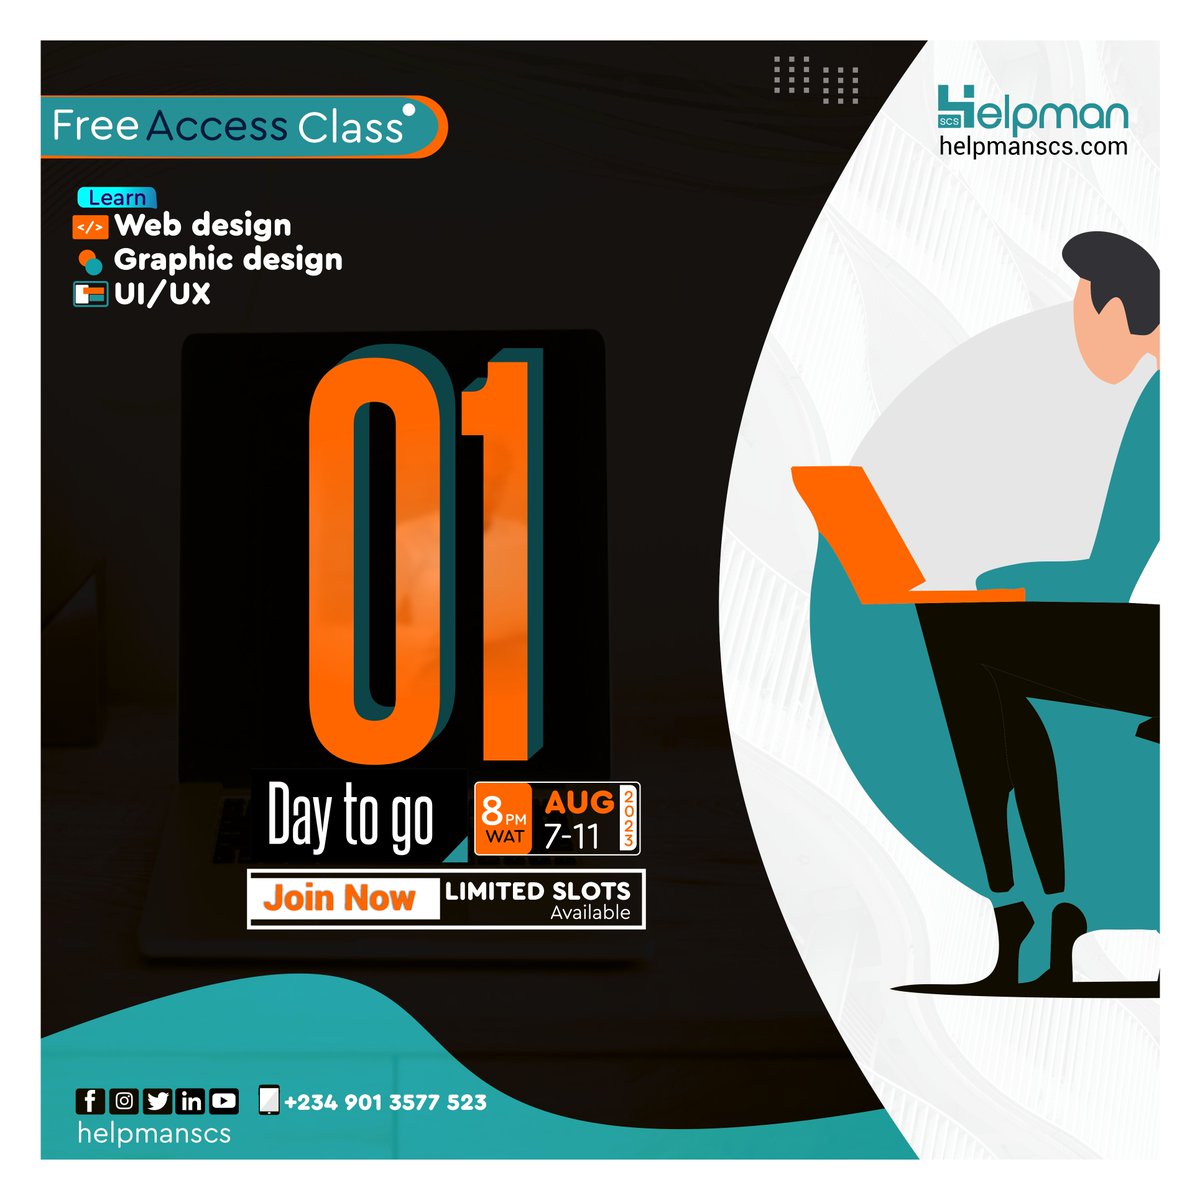 Get ready to be amazed as we take you on a journey of discovery in the fascinating world of ICT

#explorepage #techinnigeria #digitalskills #freetechclass #helpmanscs #freeclass #instagramfeeds #digitalskillsinnigeria  #webdesign #webdesignclass #freewebdesignclass #webinar